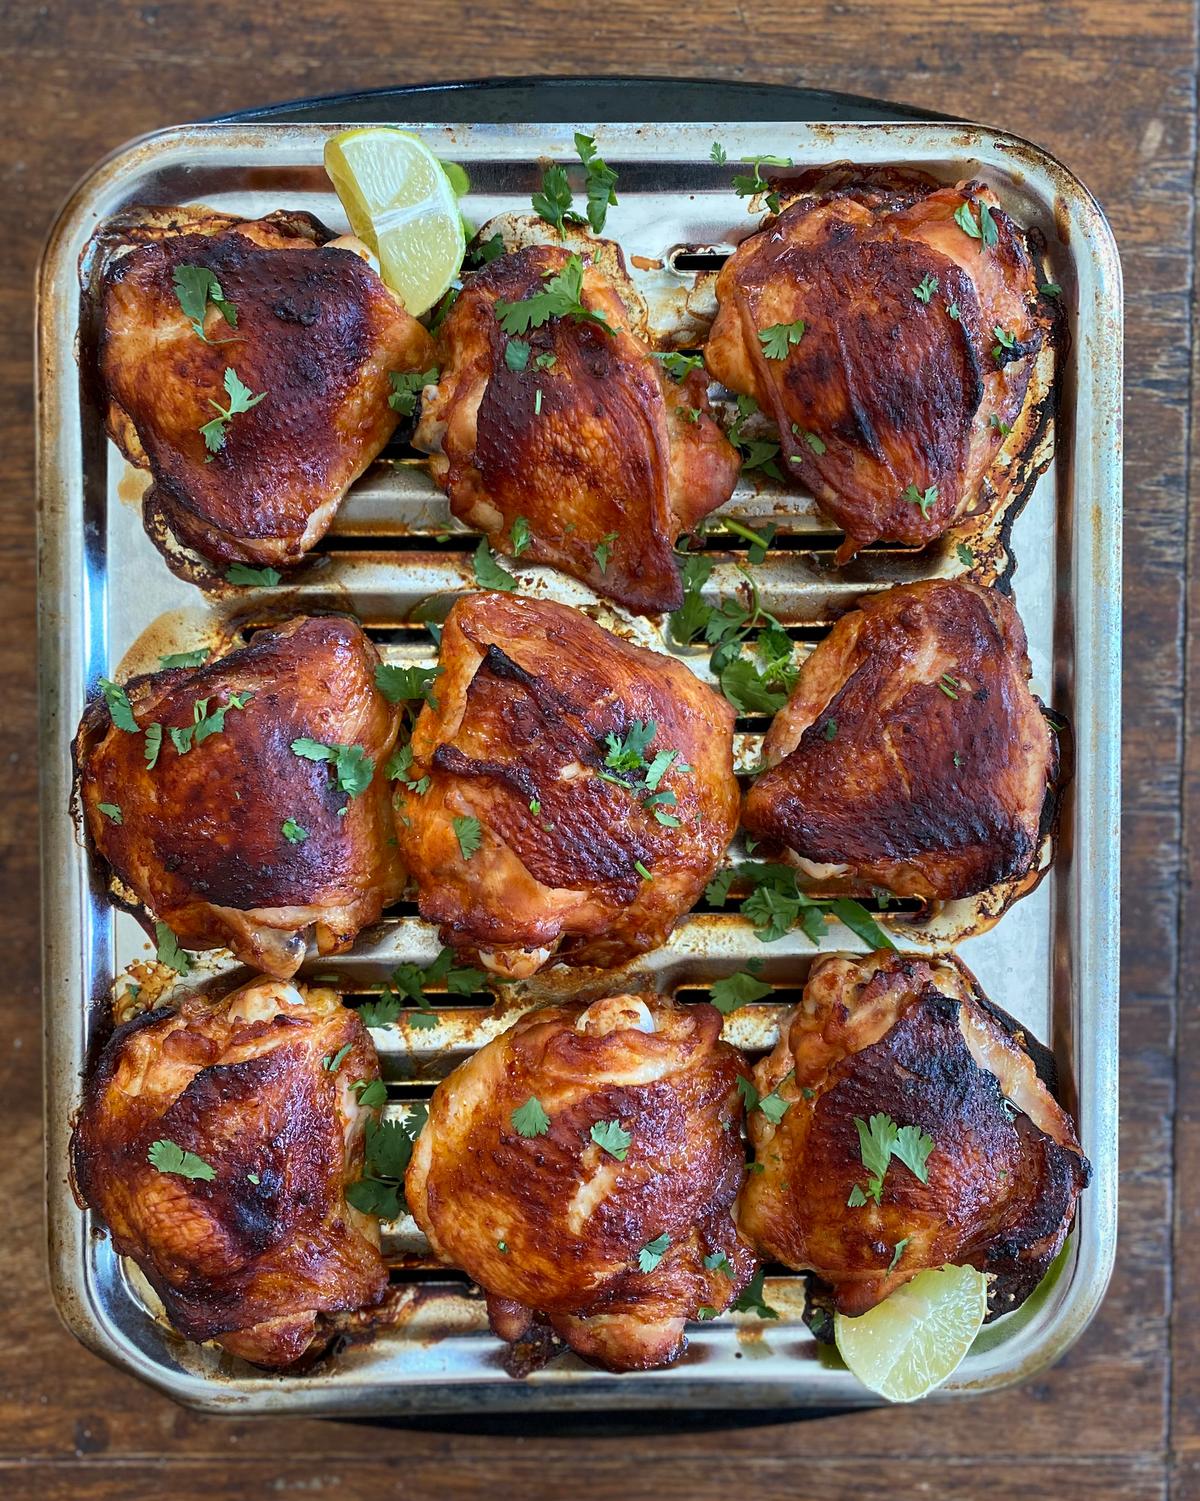 A marinade of fiery gochujang, soy sauce, lime juice, brown sugar, and ginger gives these chicken thighs a balance of salt, sweet, acid, and heat. (Lynda Balslev for Tastefood)